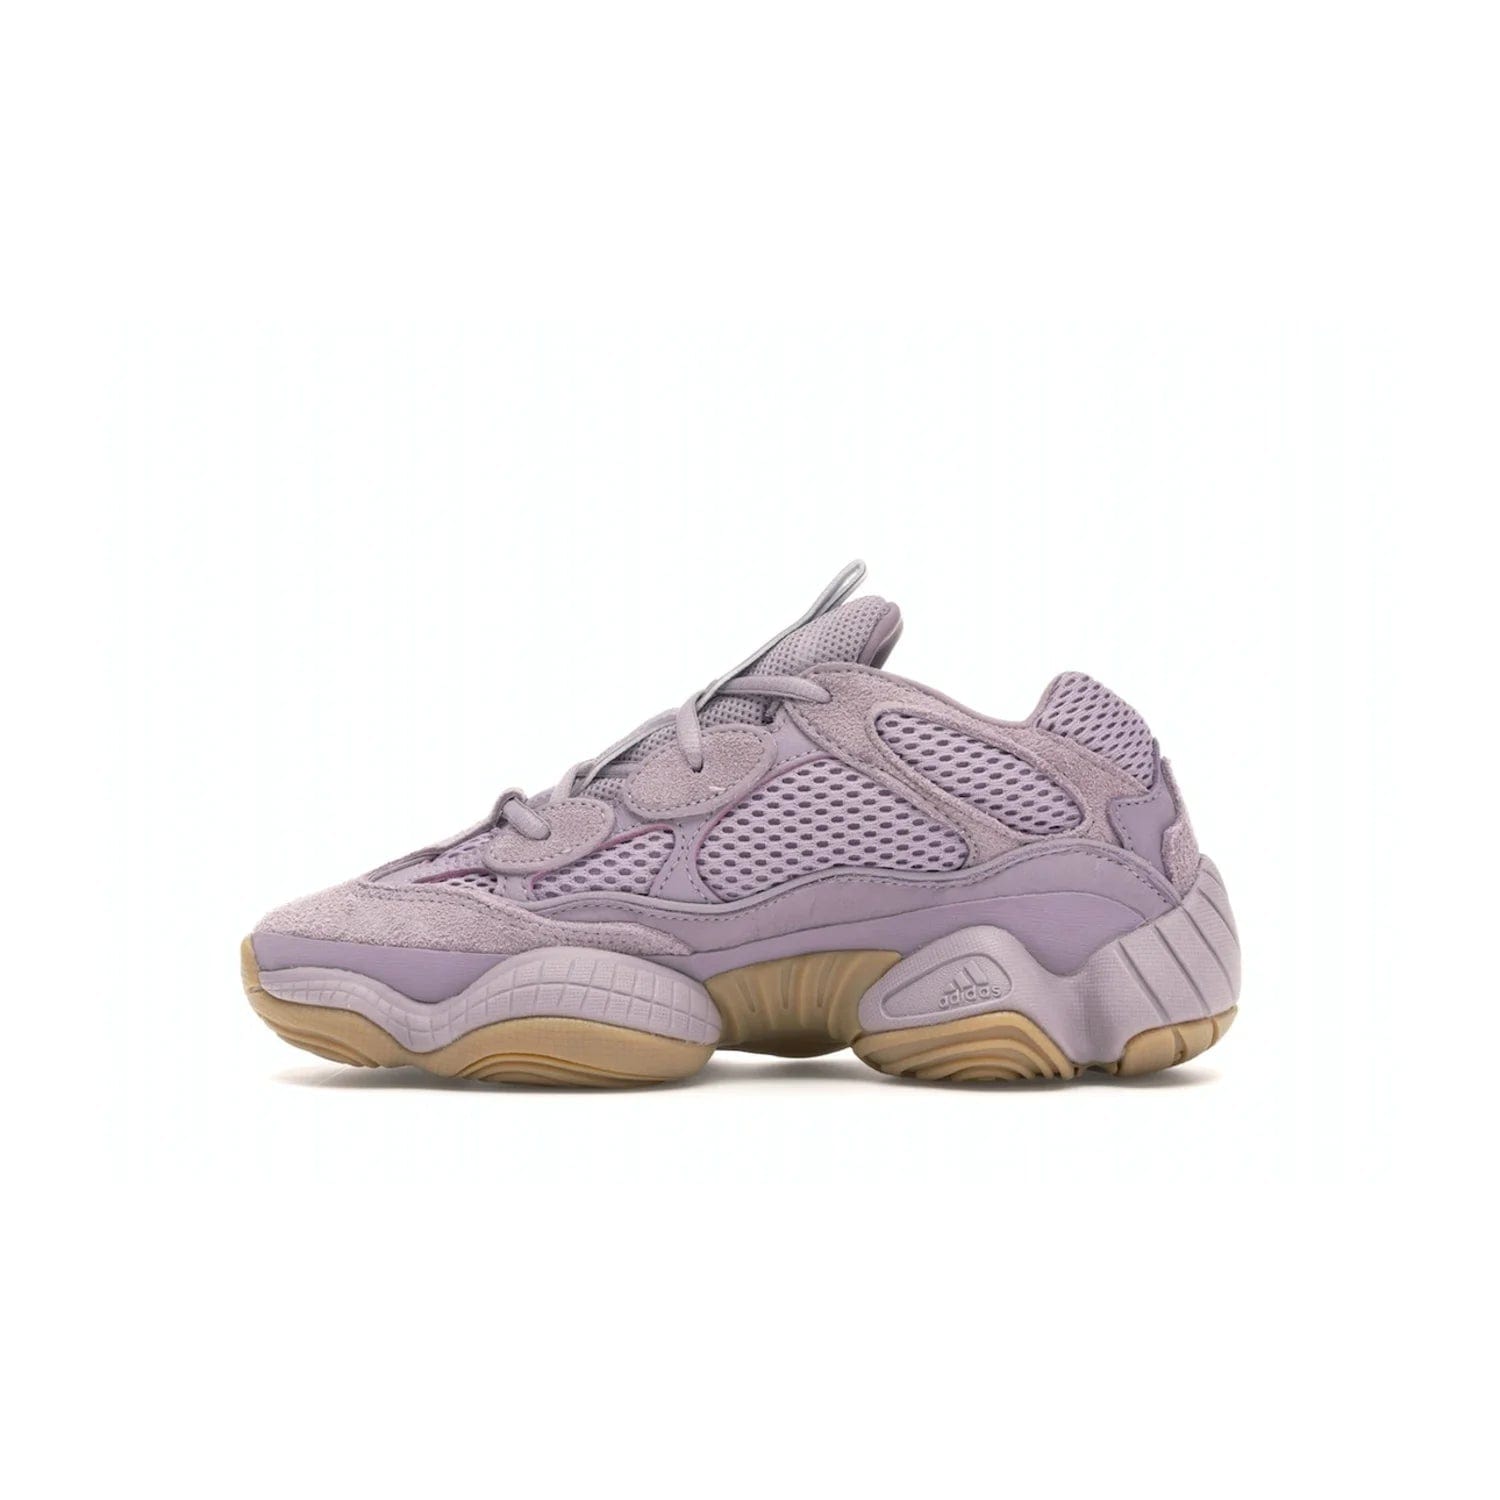 adidas Yeezy 500 Soft Vision - Image 19 - Only at www.BallersClubKickz.com - New adidas Yeezy 500 Soft Vision sneaker featuring a combination of mesh, leather, and suede in a classic Soft Vision colorway. Gum rubber outsole ensures durability and traction. An everyday sneaker that stands out from the crowd.